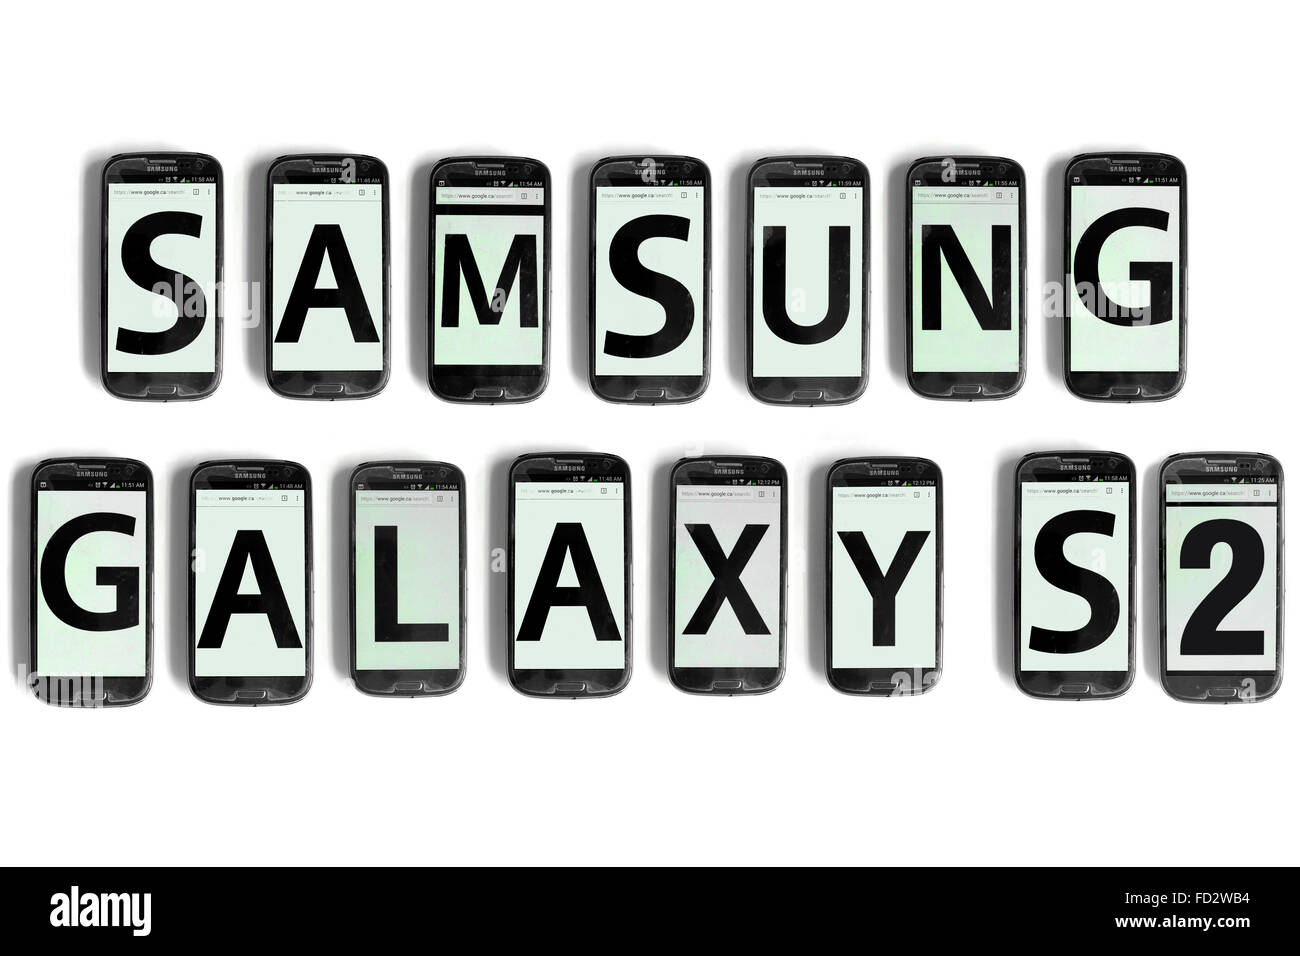 Samsung Galaxy S2 spelled on the screens of smartphones photographed against a white background. Stock Photo